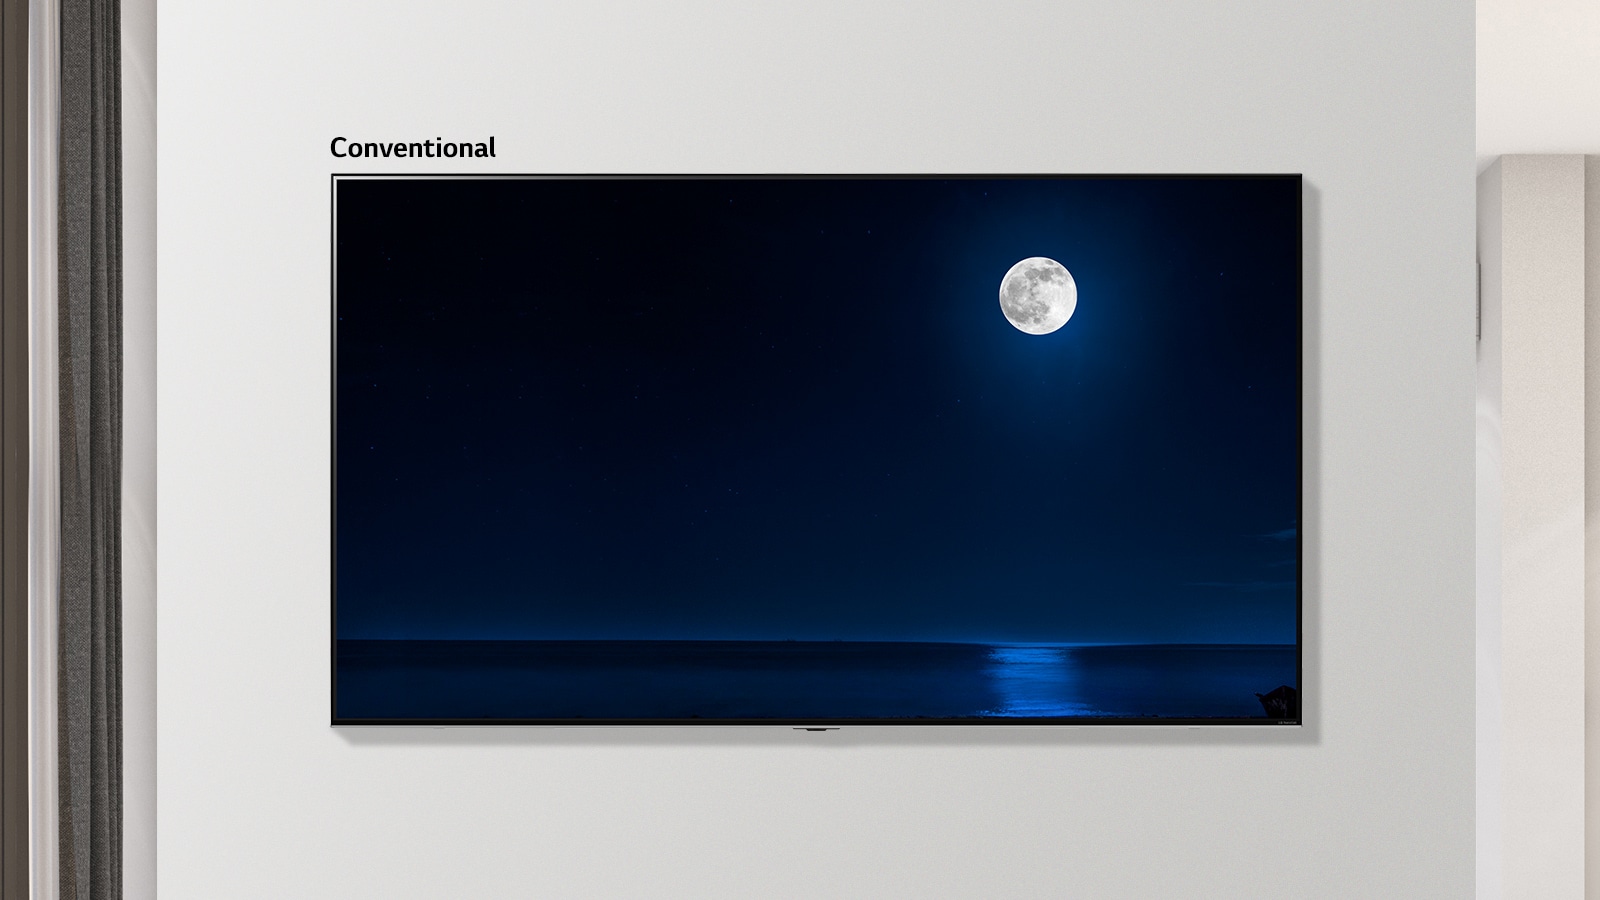 Scrollable image of a wall mounted TV showing a dark scene of a full moon reflecting on water. The scene alternates between a regular size TV and large screen LG NanoCell TV.